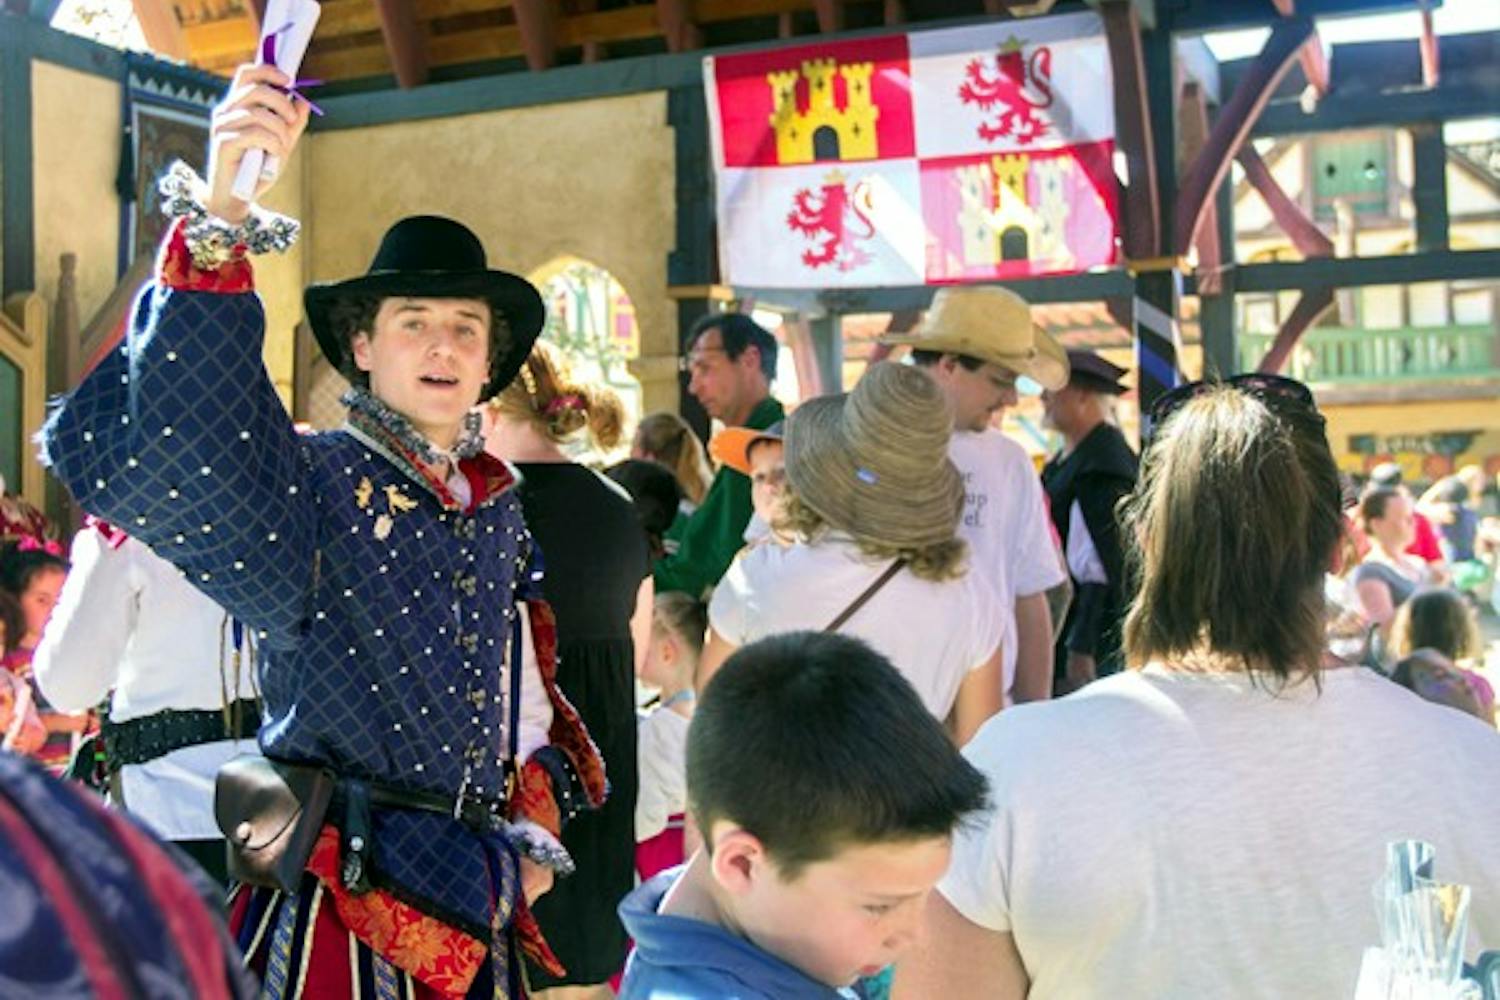 Noah Brown, who plays prince Nicholas at the Renaissance Festival, passes out diplomas of knighthood to young children at a faux knighting ceremony. Brown, an ASU student, is playing a lead role in the festival's plot this year. Click on the picture for a slideshow of the festival. (Photo by Dominic Valente)